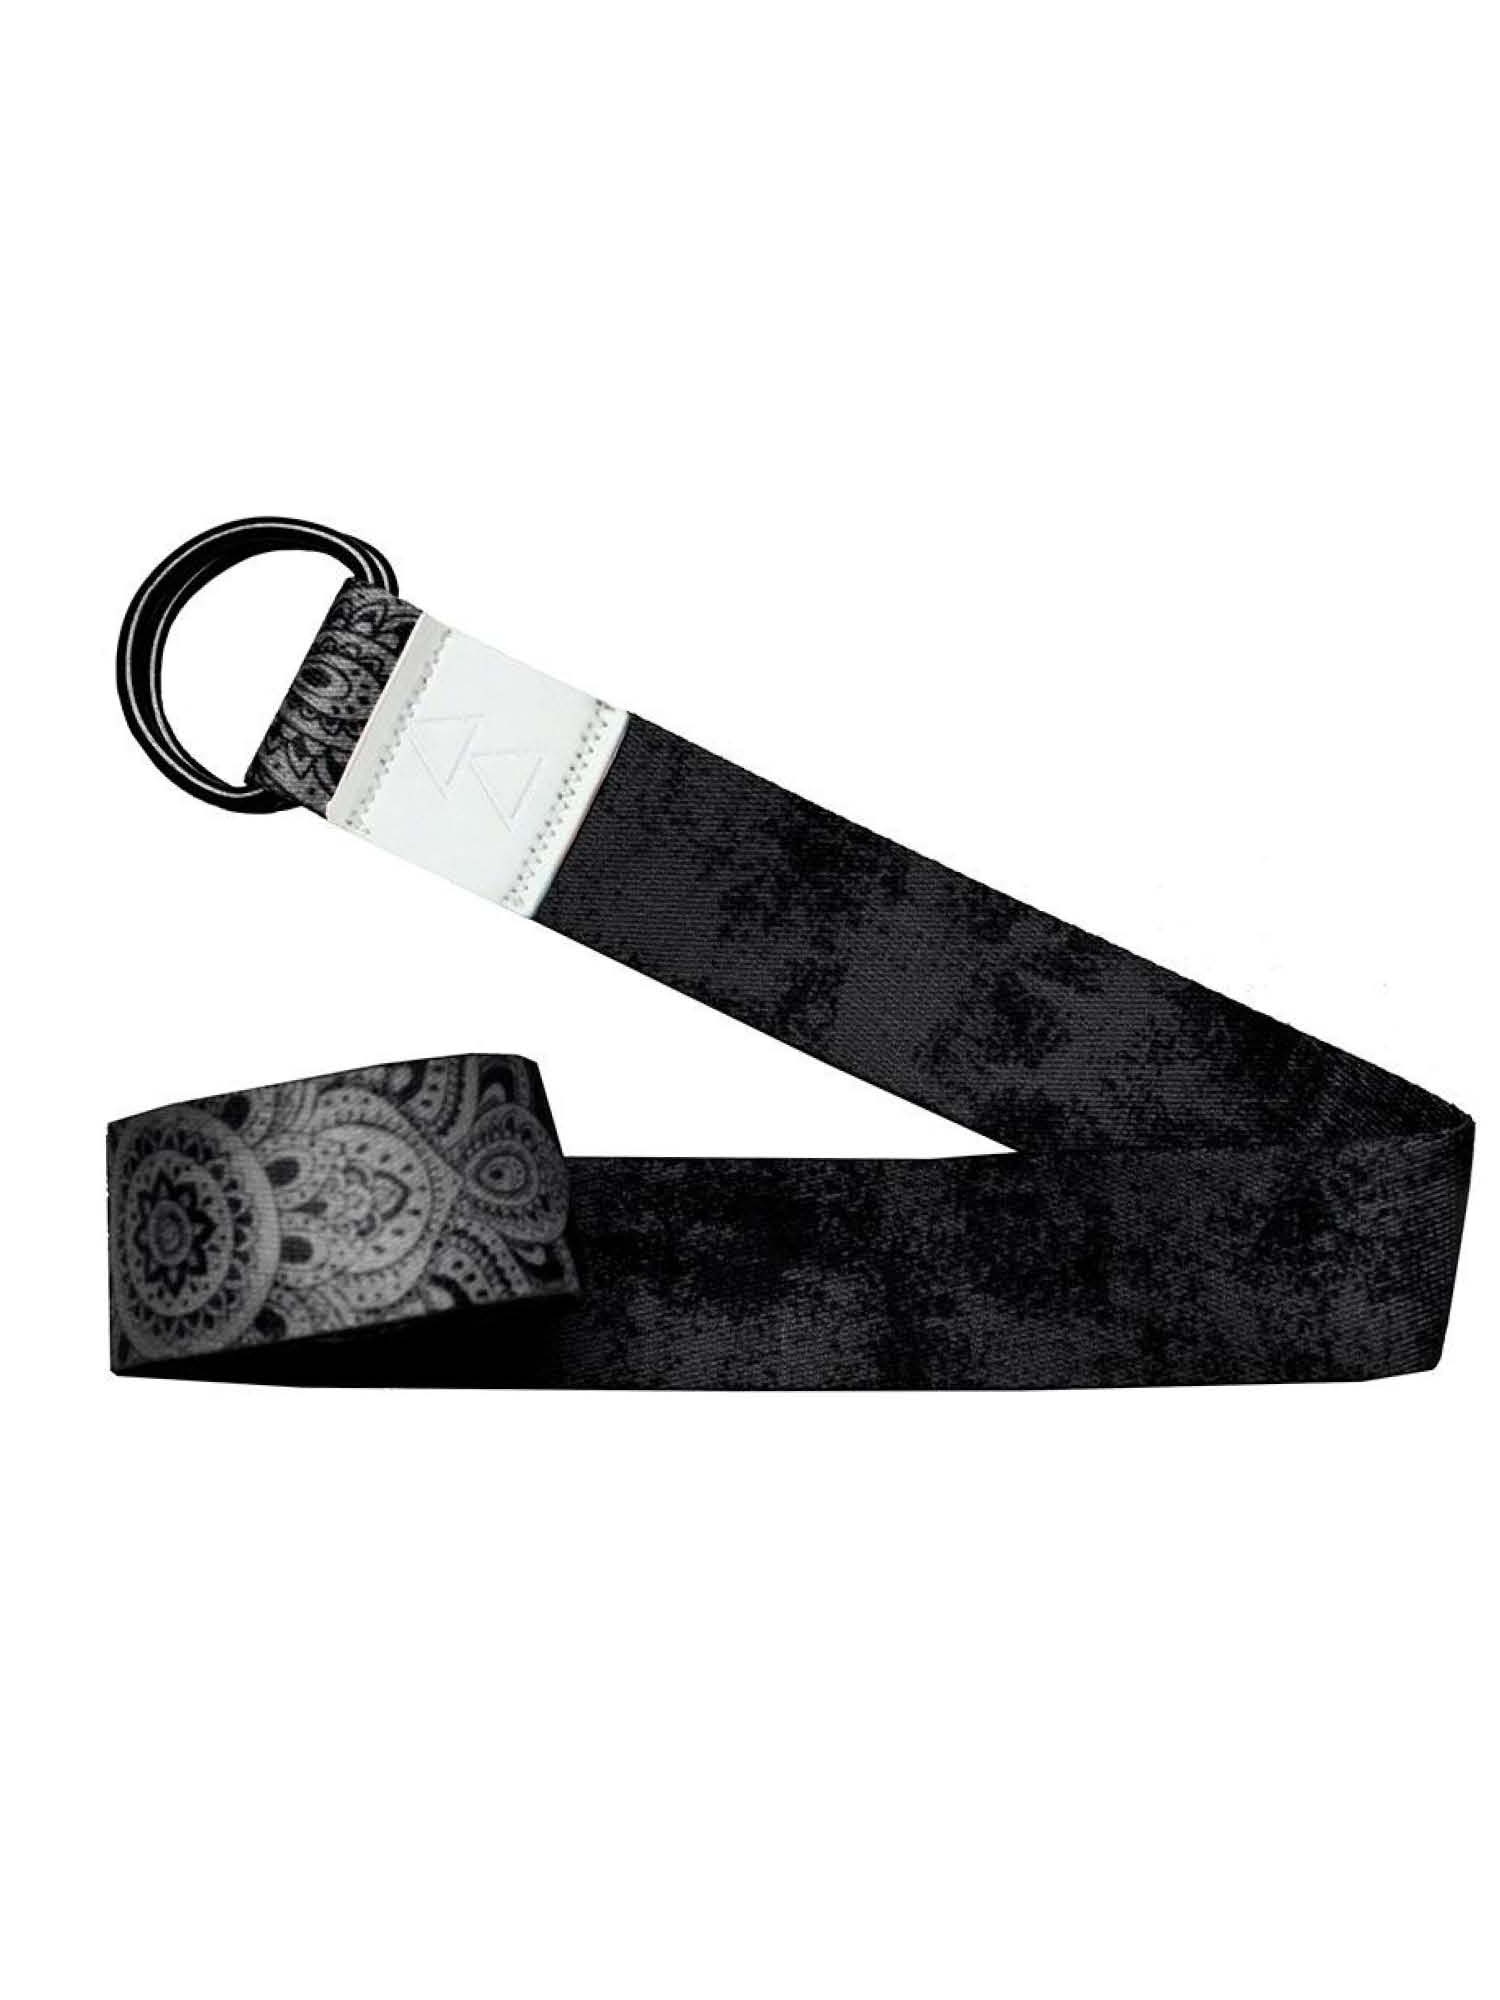 Yoga Design Lab Strap from Nice to meet me